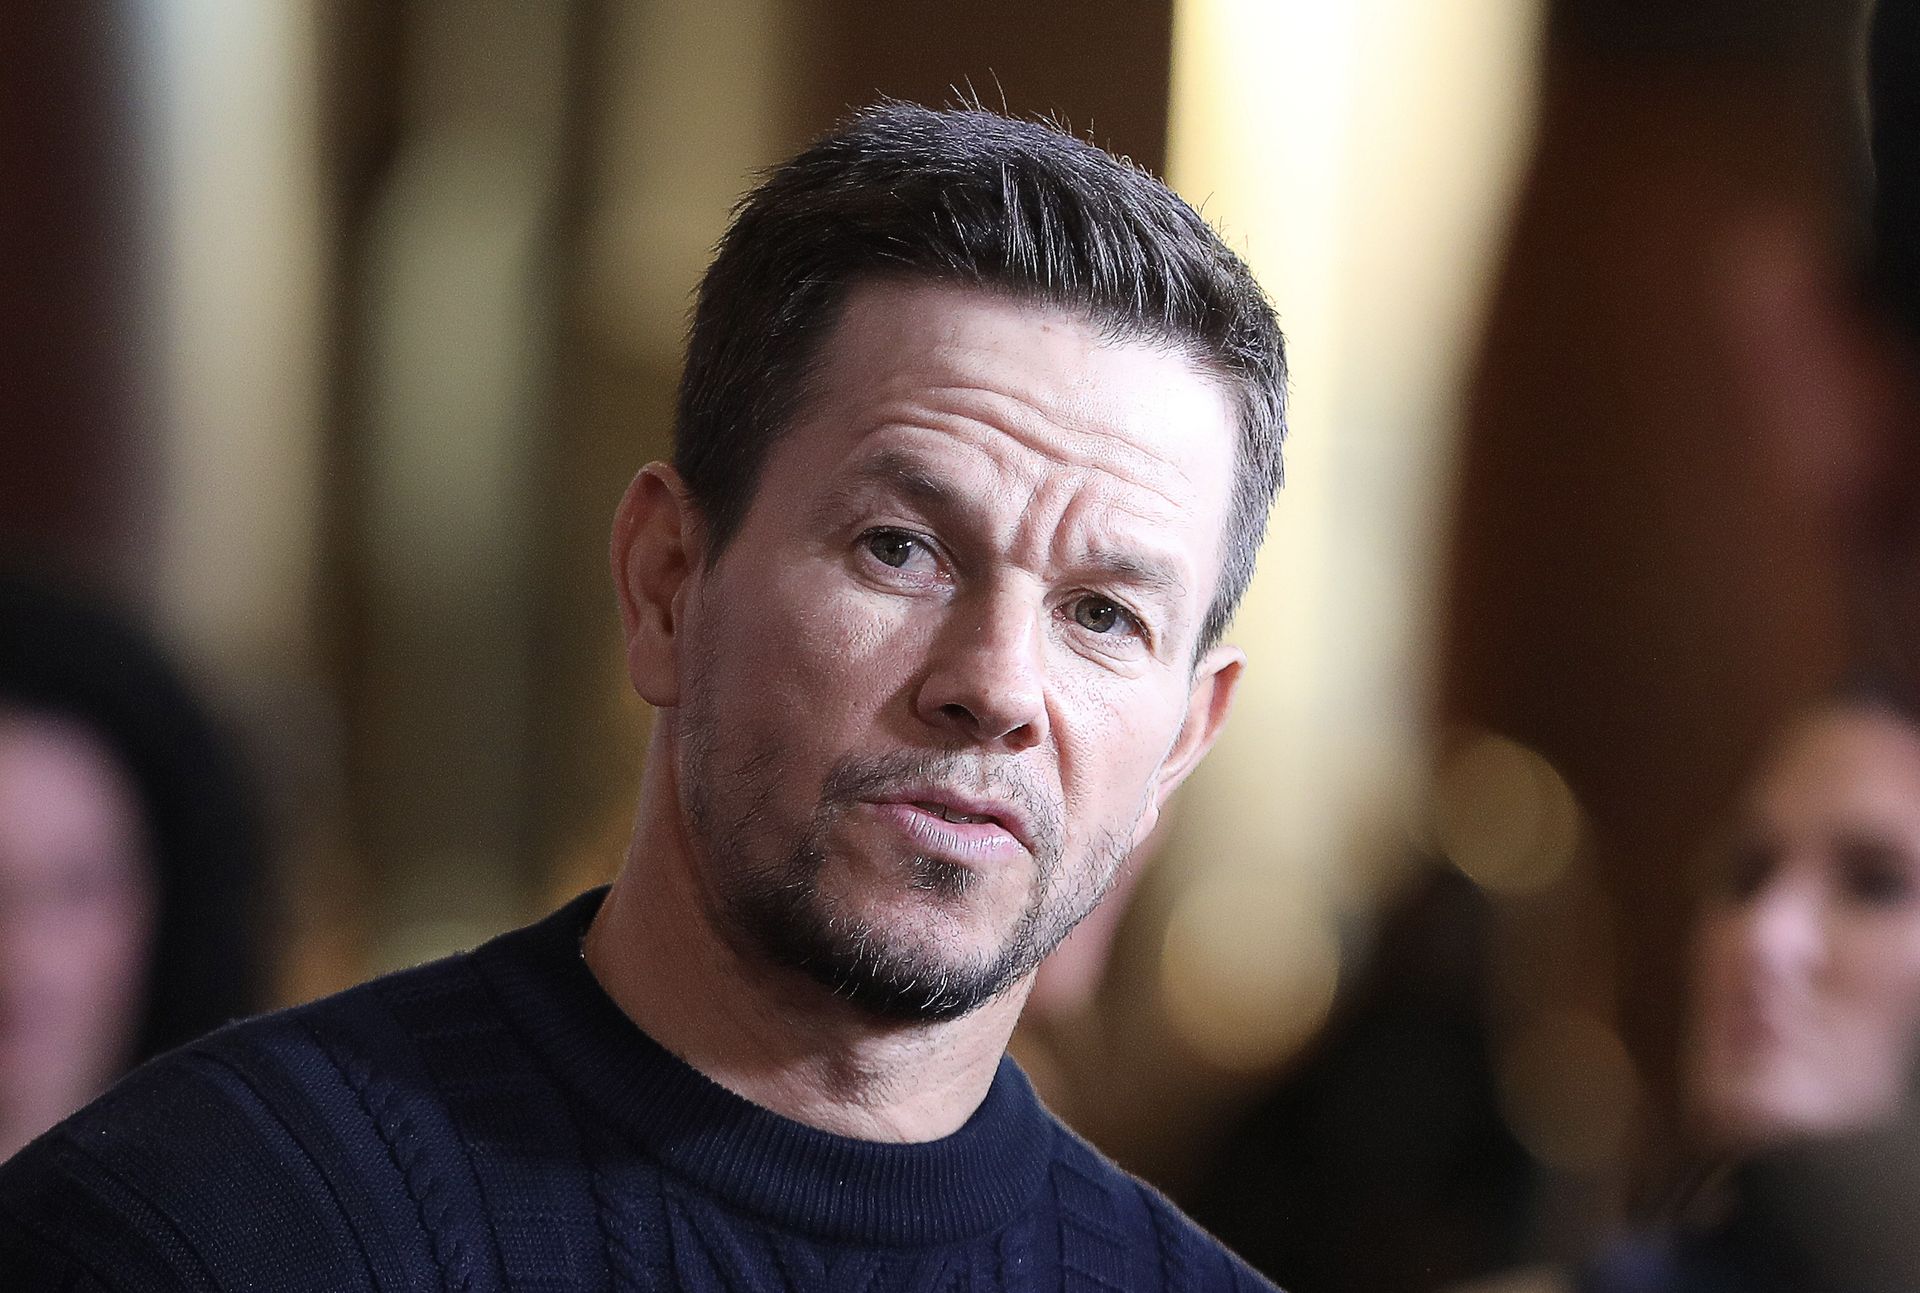 Mark Wahlberg religion and his views are well-known and he has long defended his Catholic views, and in a recent interview with Today , he said that the lack...